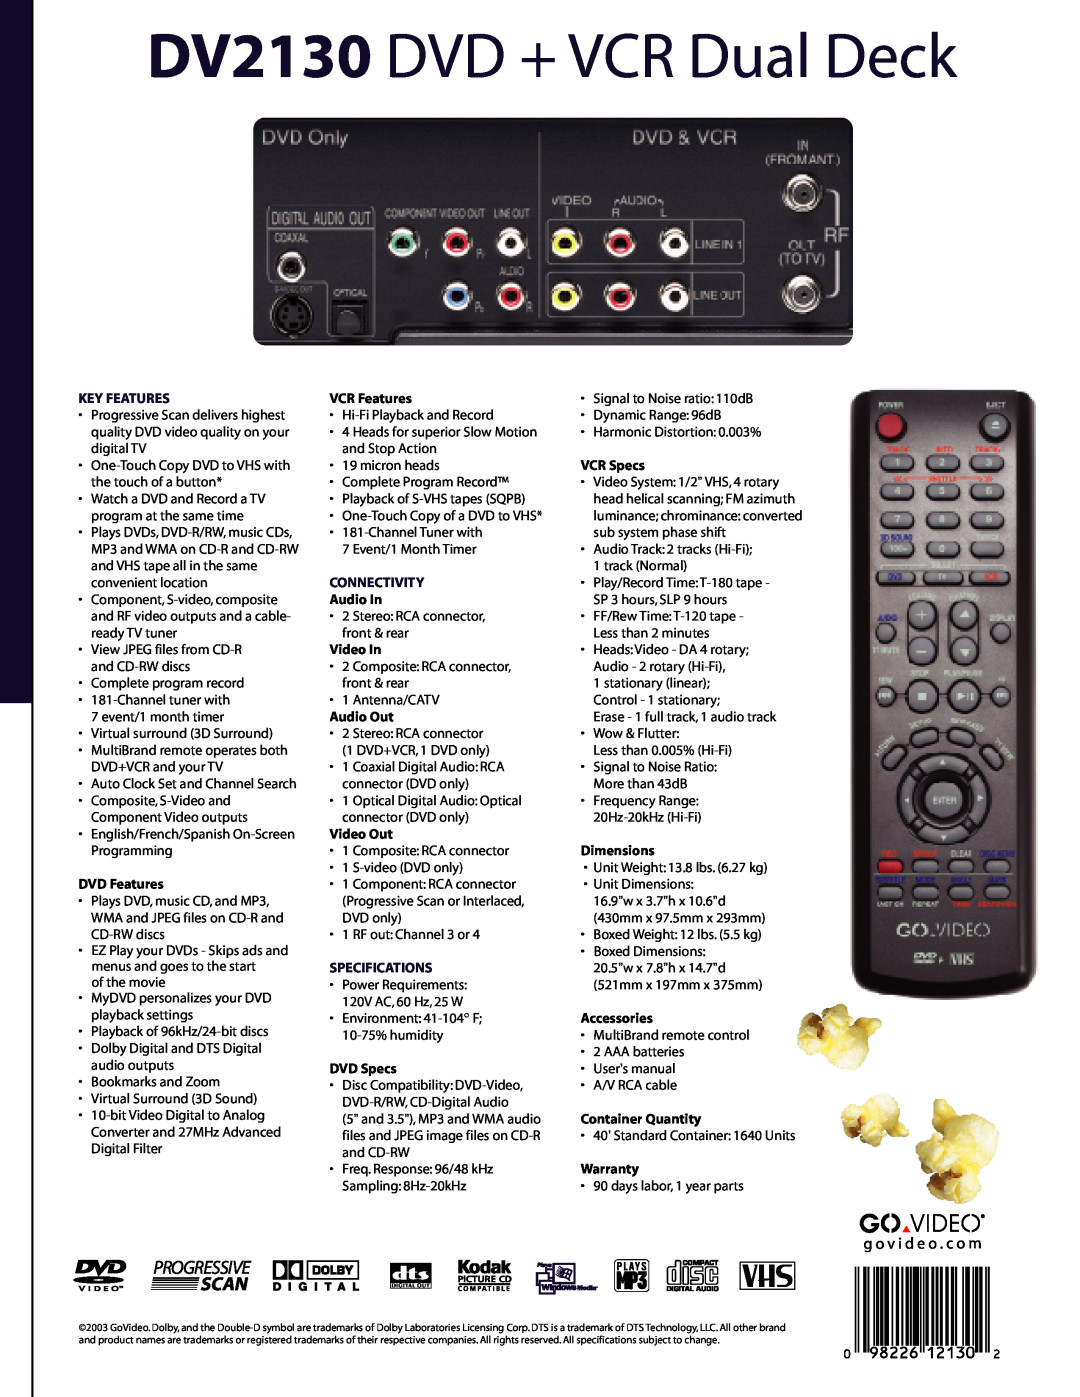 GoVideo manual DV2130 DVD + VCR Dual Deck, Key Features, Connectivity, Specifications 